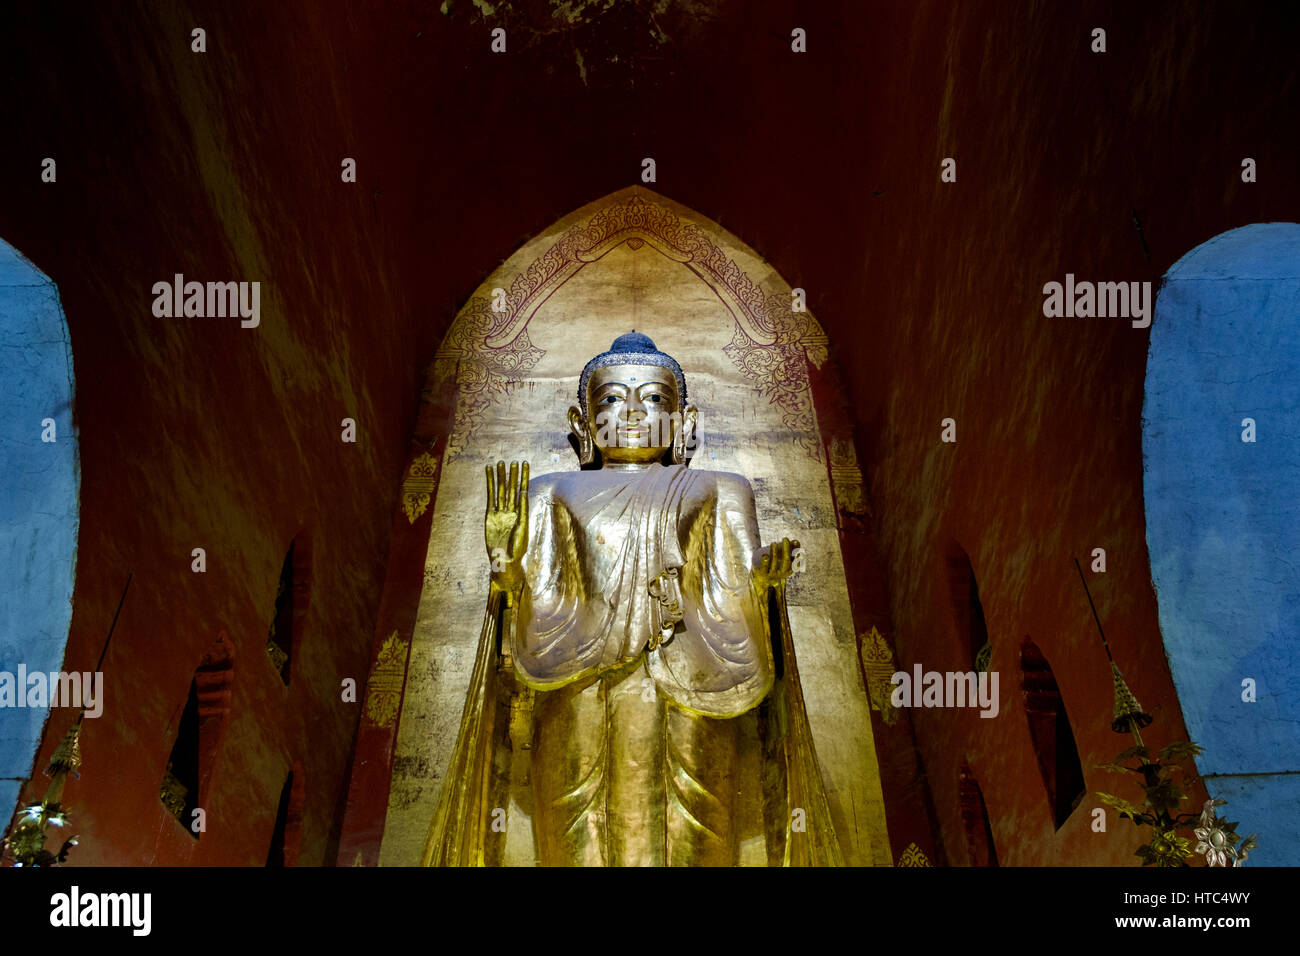 One of the four gilded teak standing Buddha images at Ananda Temple, Bagan, Myanmar. Stock Photo